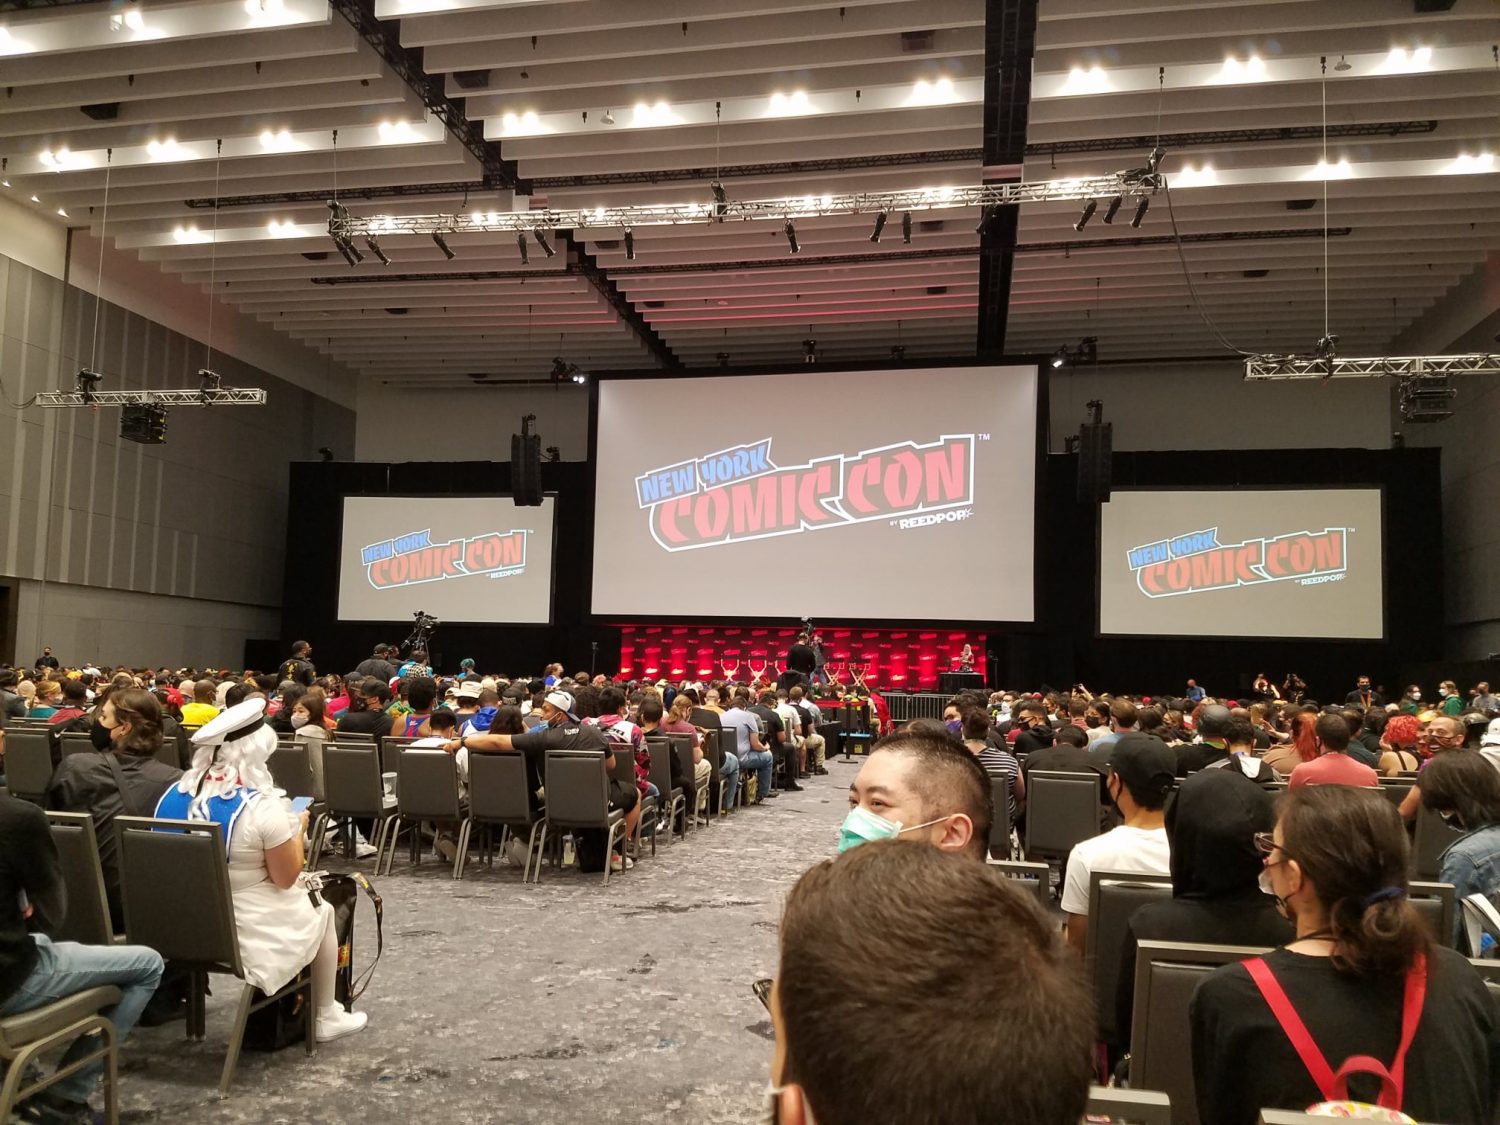 NYCC 2021